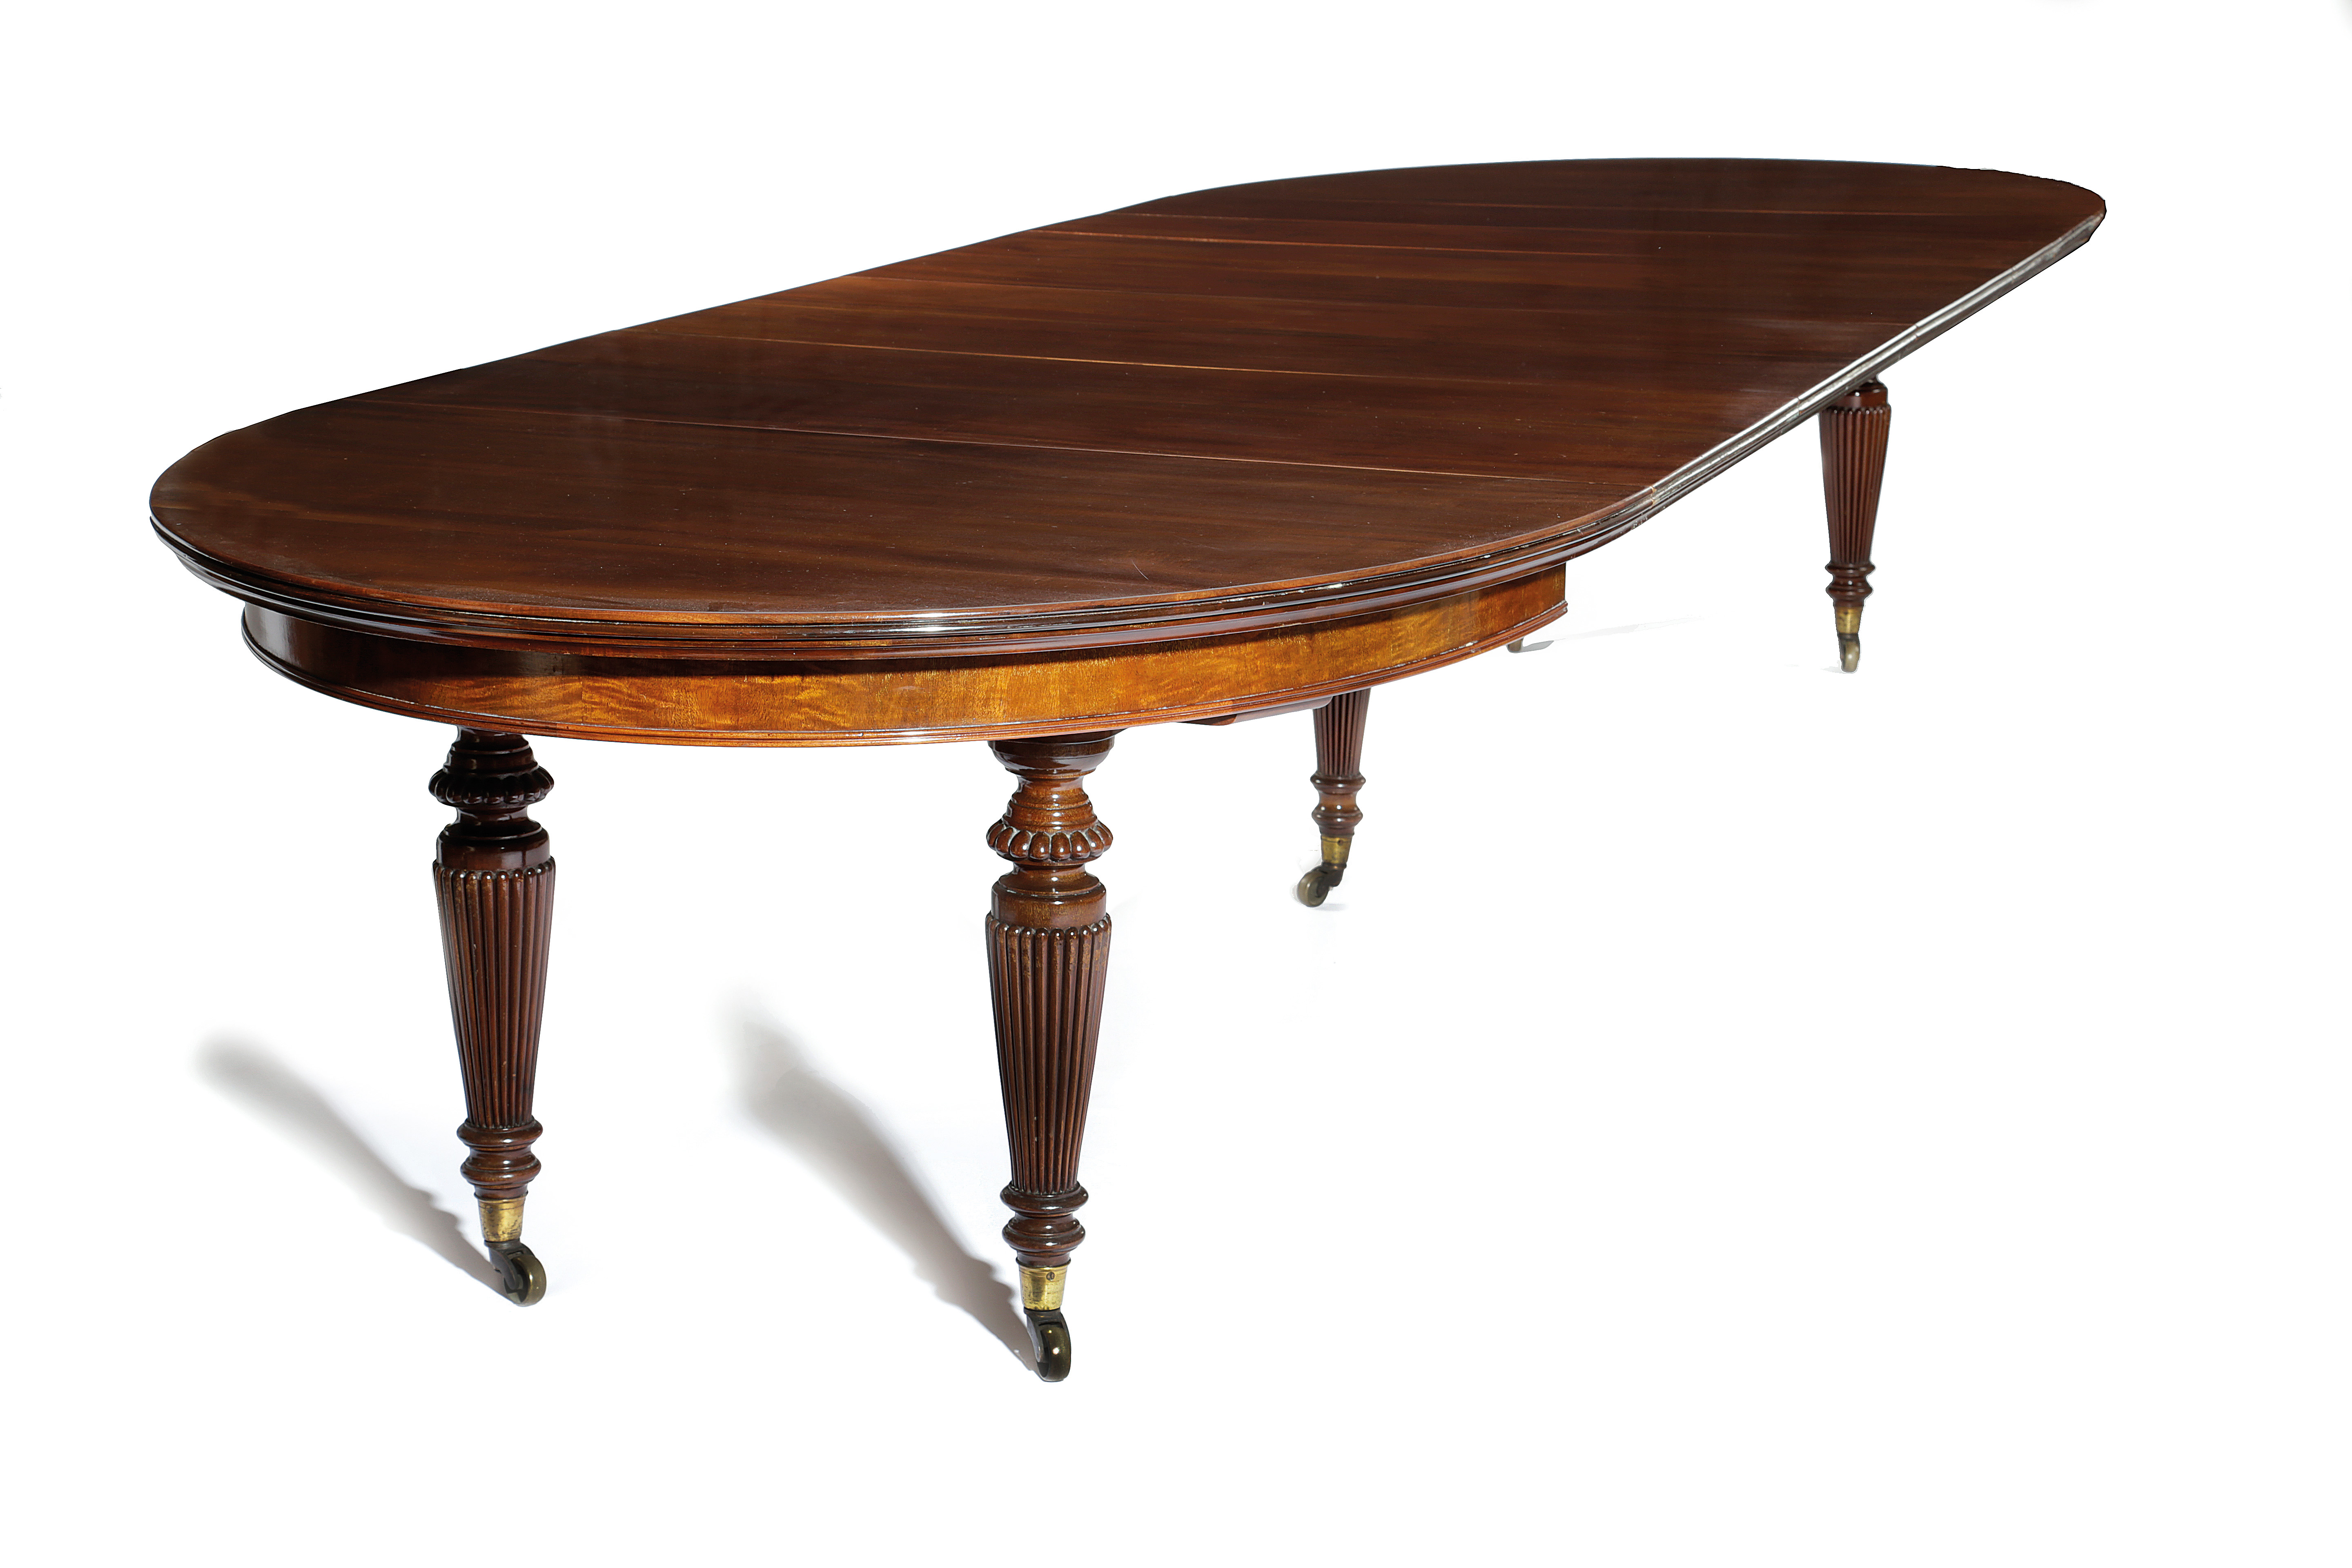 A VICTORIAN MAHOGANY DINING TABLE C.1870-80 the top with a reeded edge with rounded ends extending